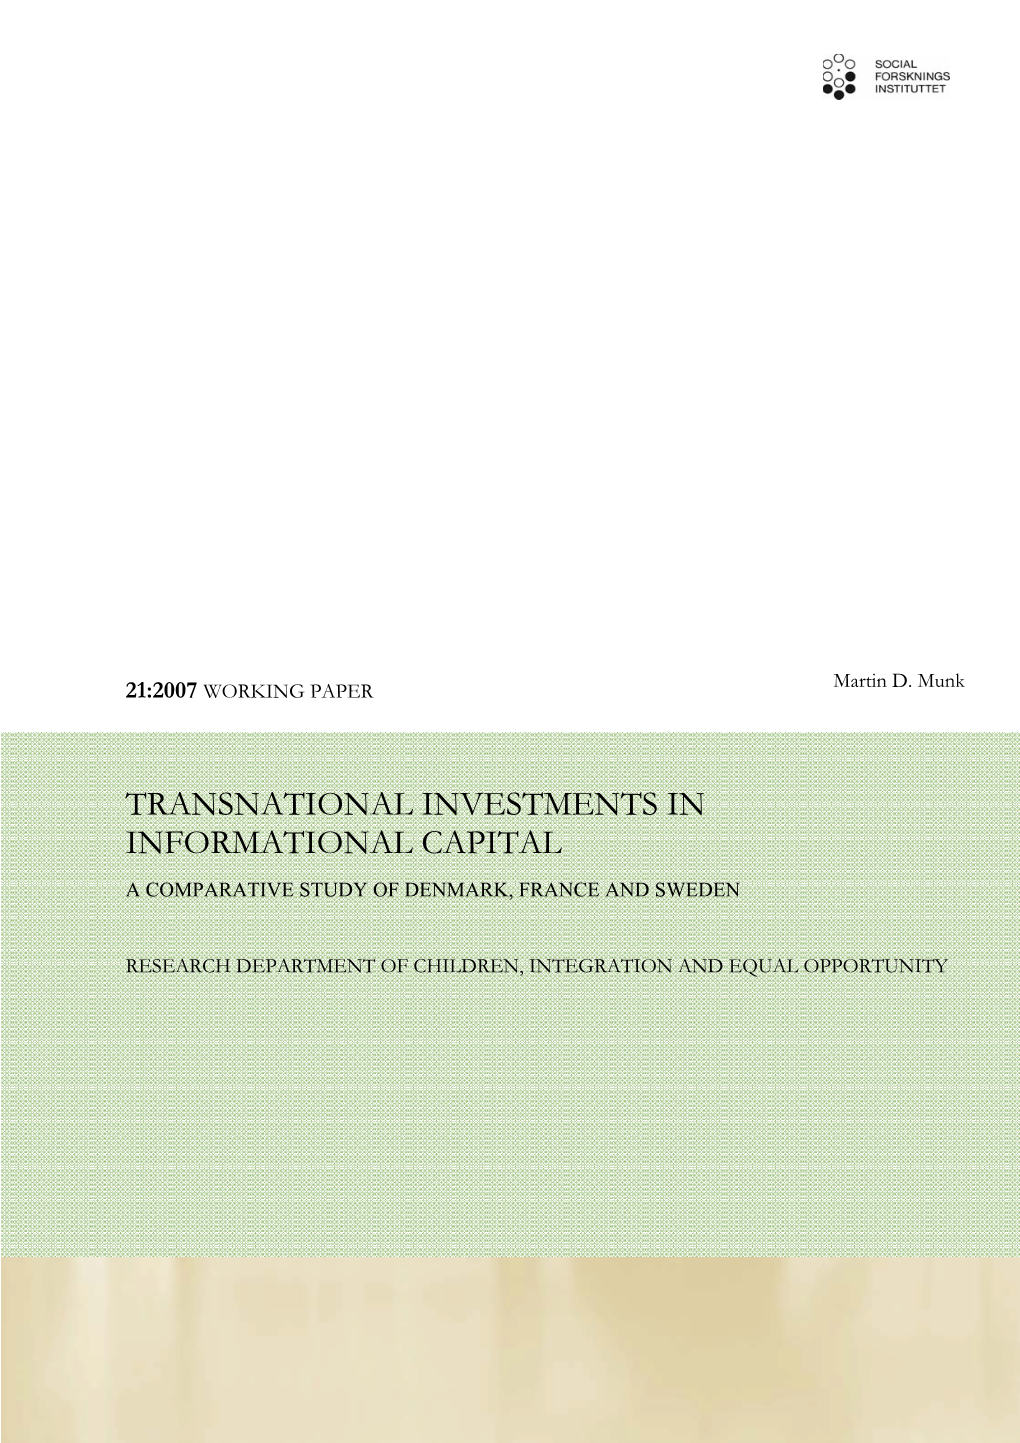 Transnational Investments in Informational Capital